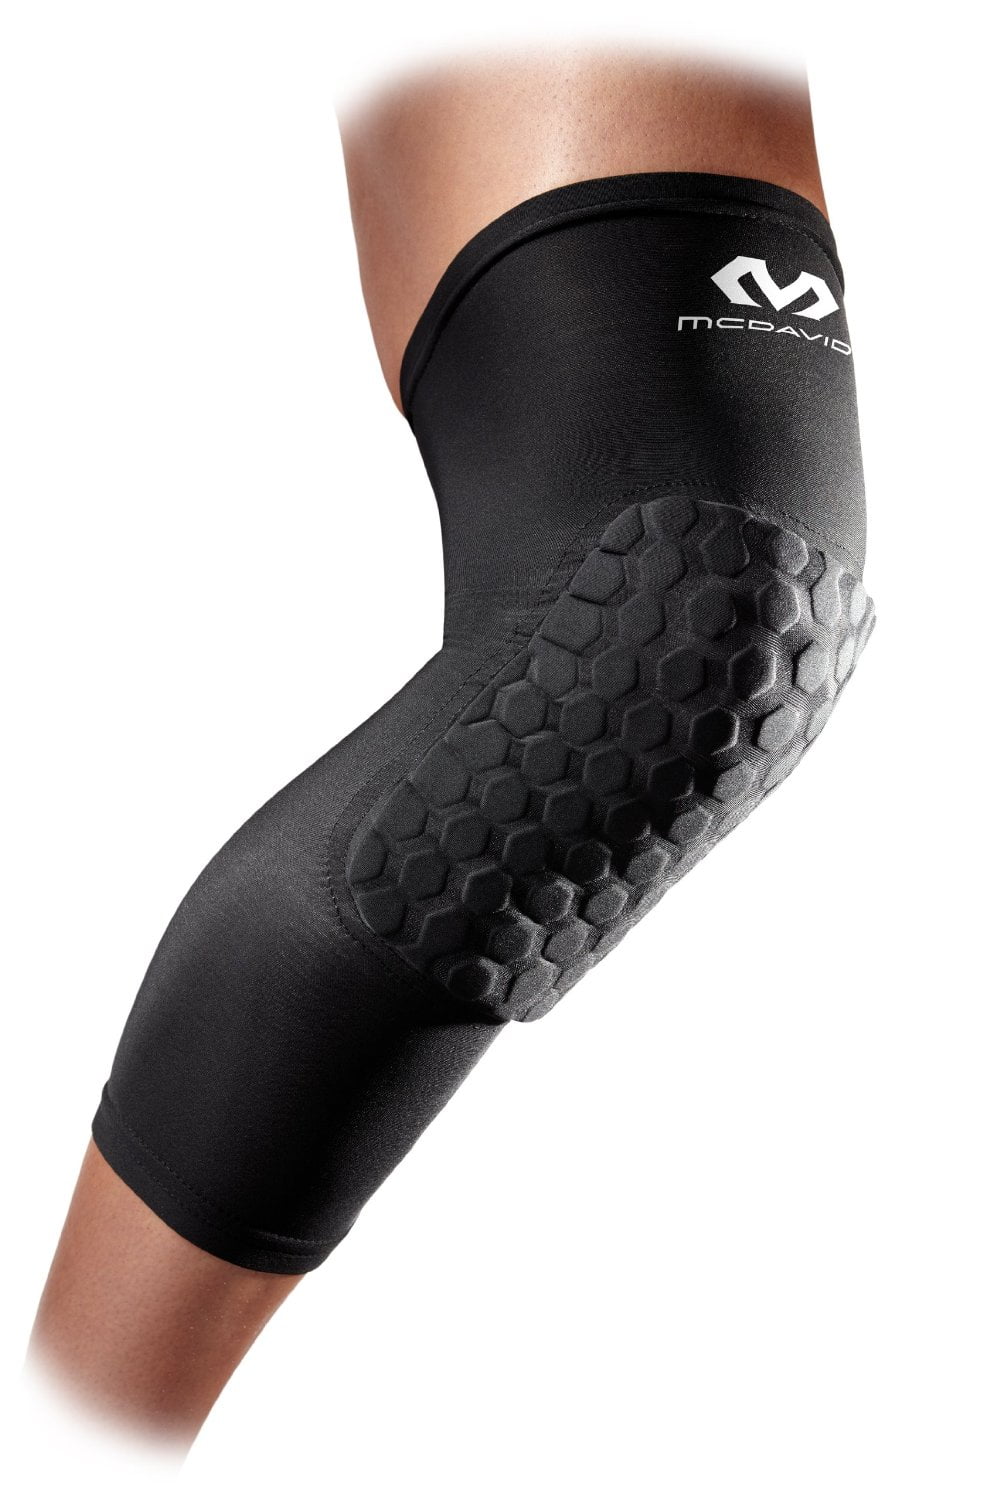 Leg Sleeves Mcdavid Knee Pad Compression Extended Support Hexpad Protective Hex 